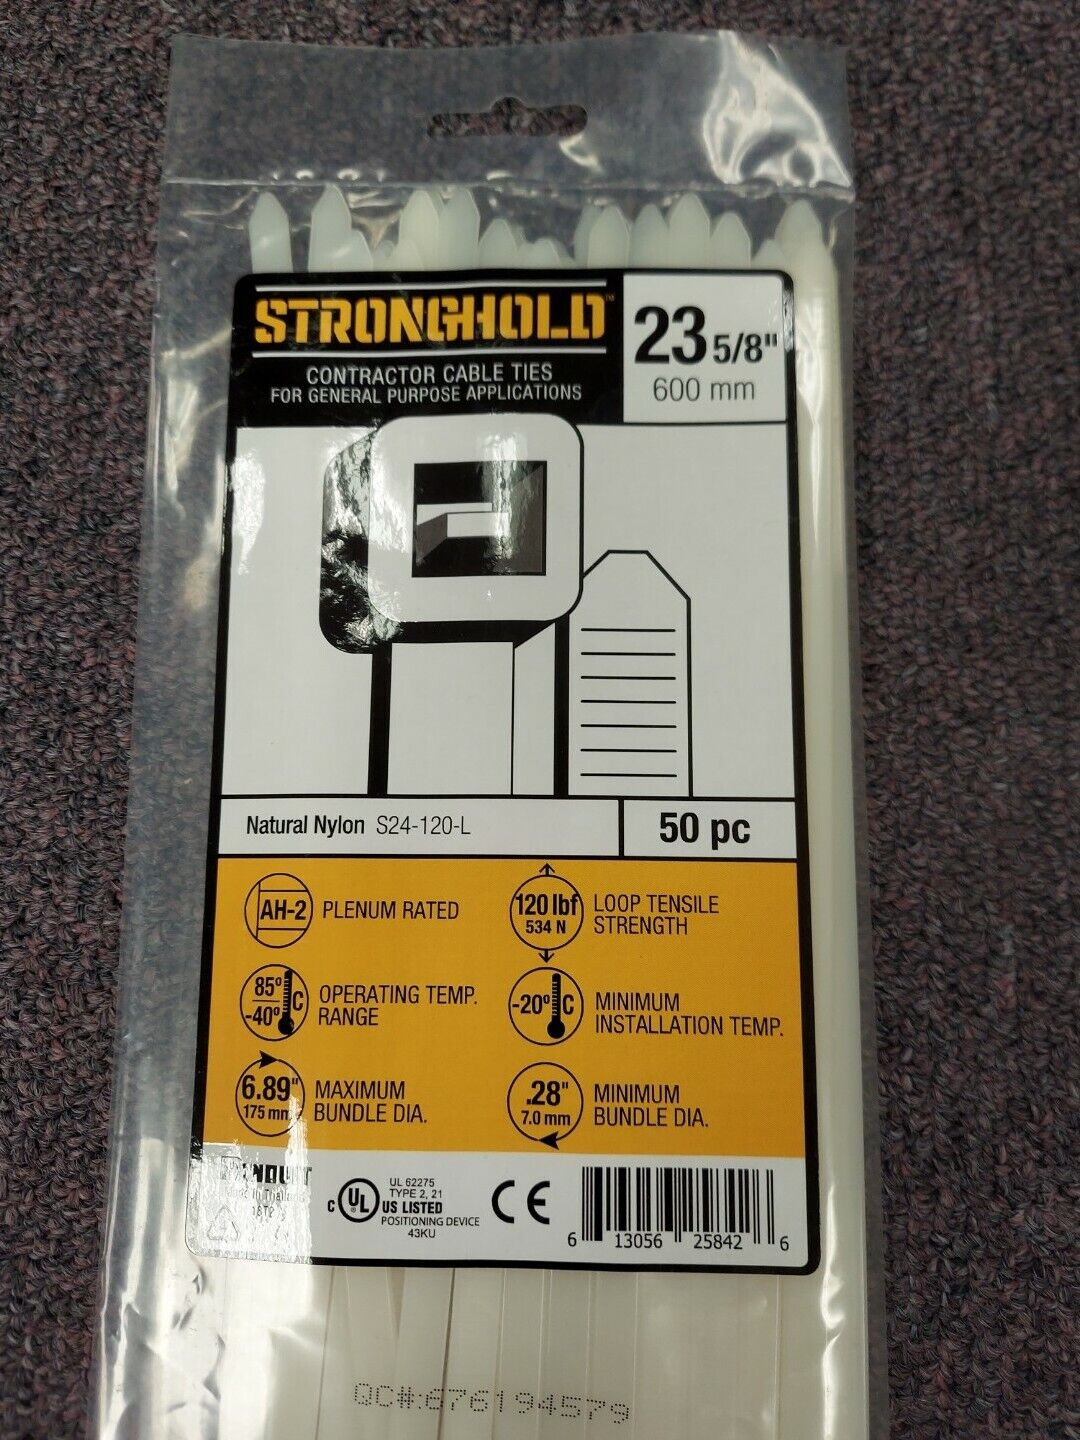 Panduit Stronghold Contractor Cable Ties 23 5/8  50 pack 600mm 120LB (OV104) - 0